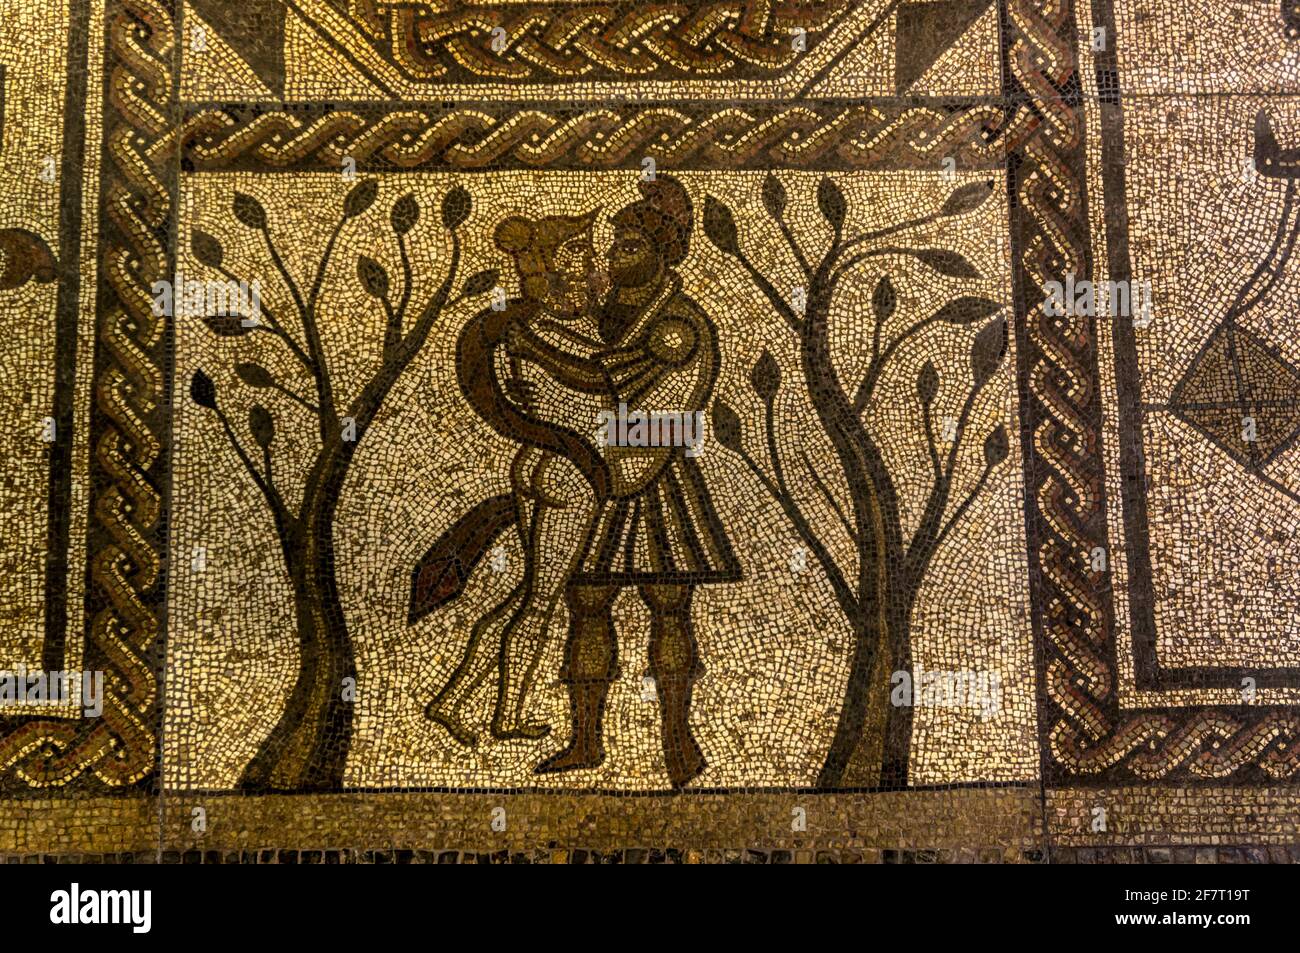 A detail from the Low Ham mosaic telling the story of Dido & Aeneas. It was made for the baths at a Roman villa in c AD 350. Stock Photo